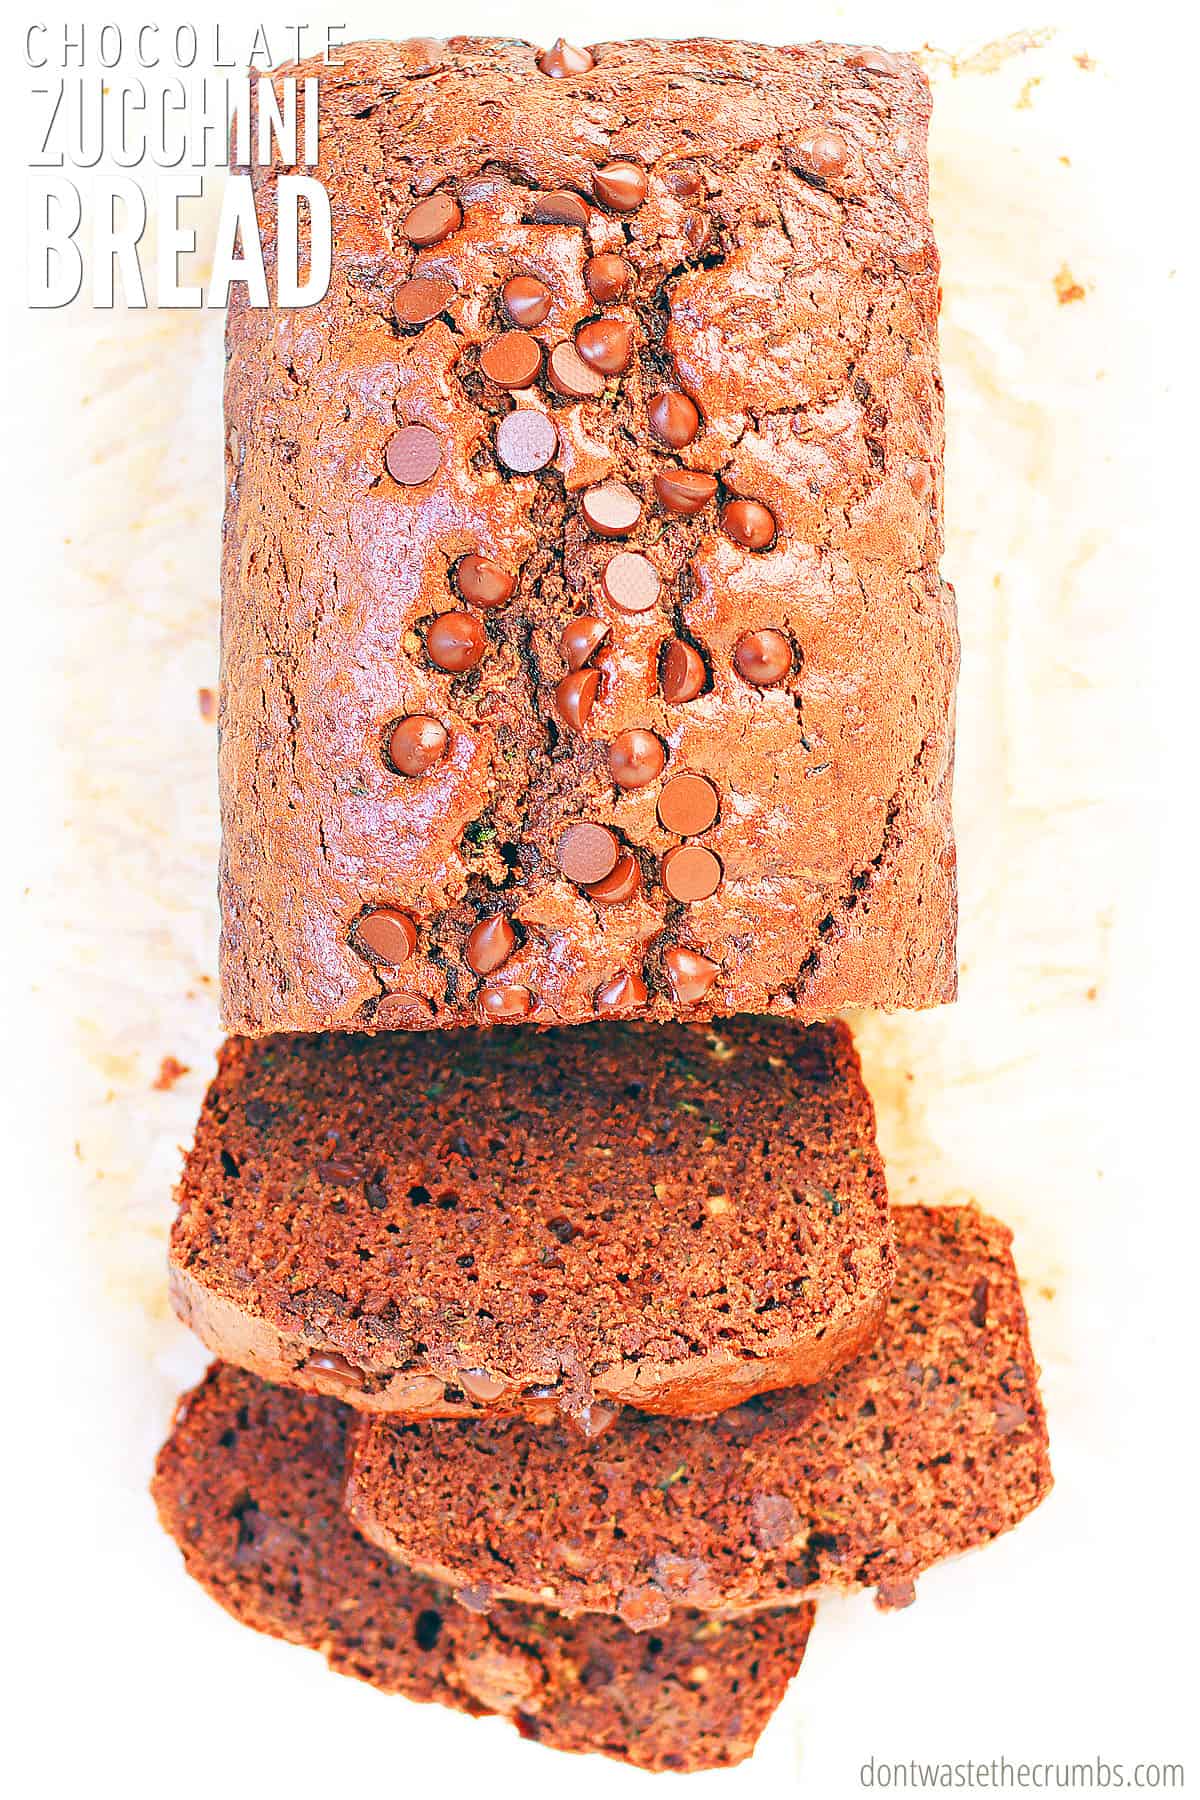 This homemade chocolate zucchini bread is so flavorful and tasty. Try this guilt-free recipe that is naturally sweetened and uses a vegetable! 